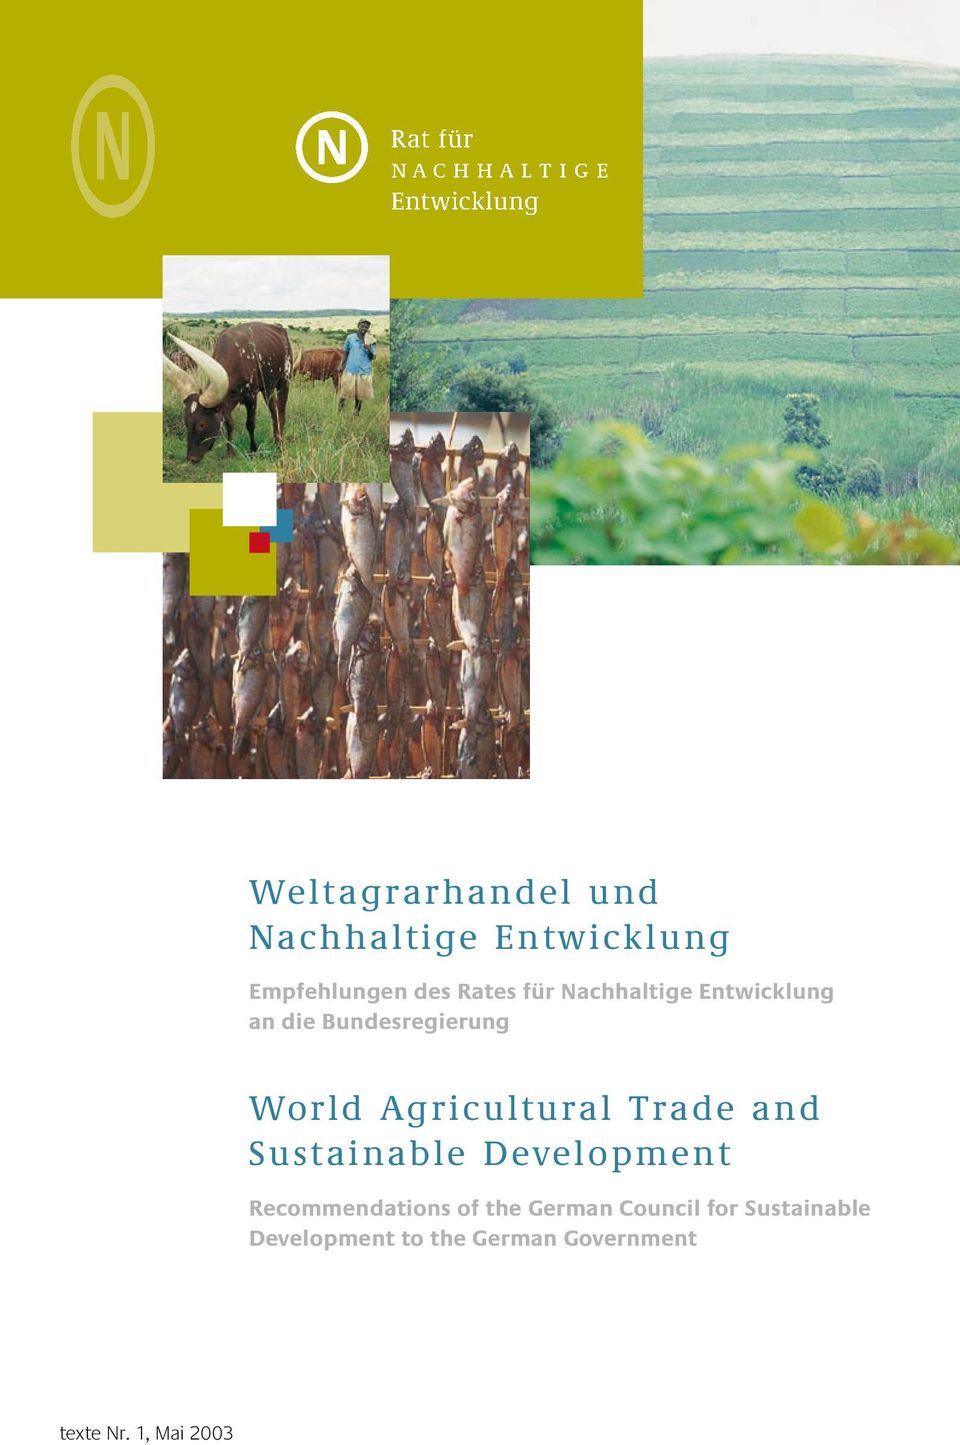 Trade and Sustainable Development Recommendations of the German